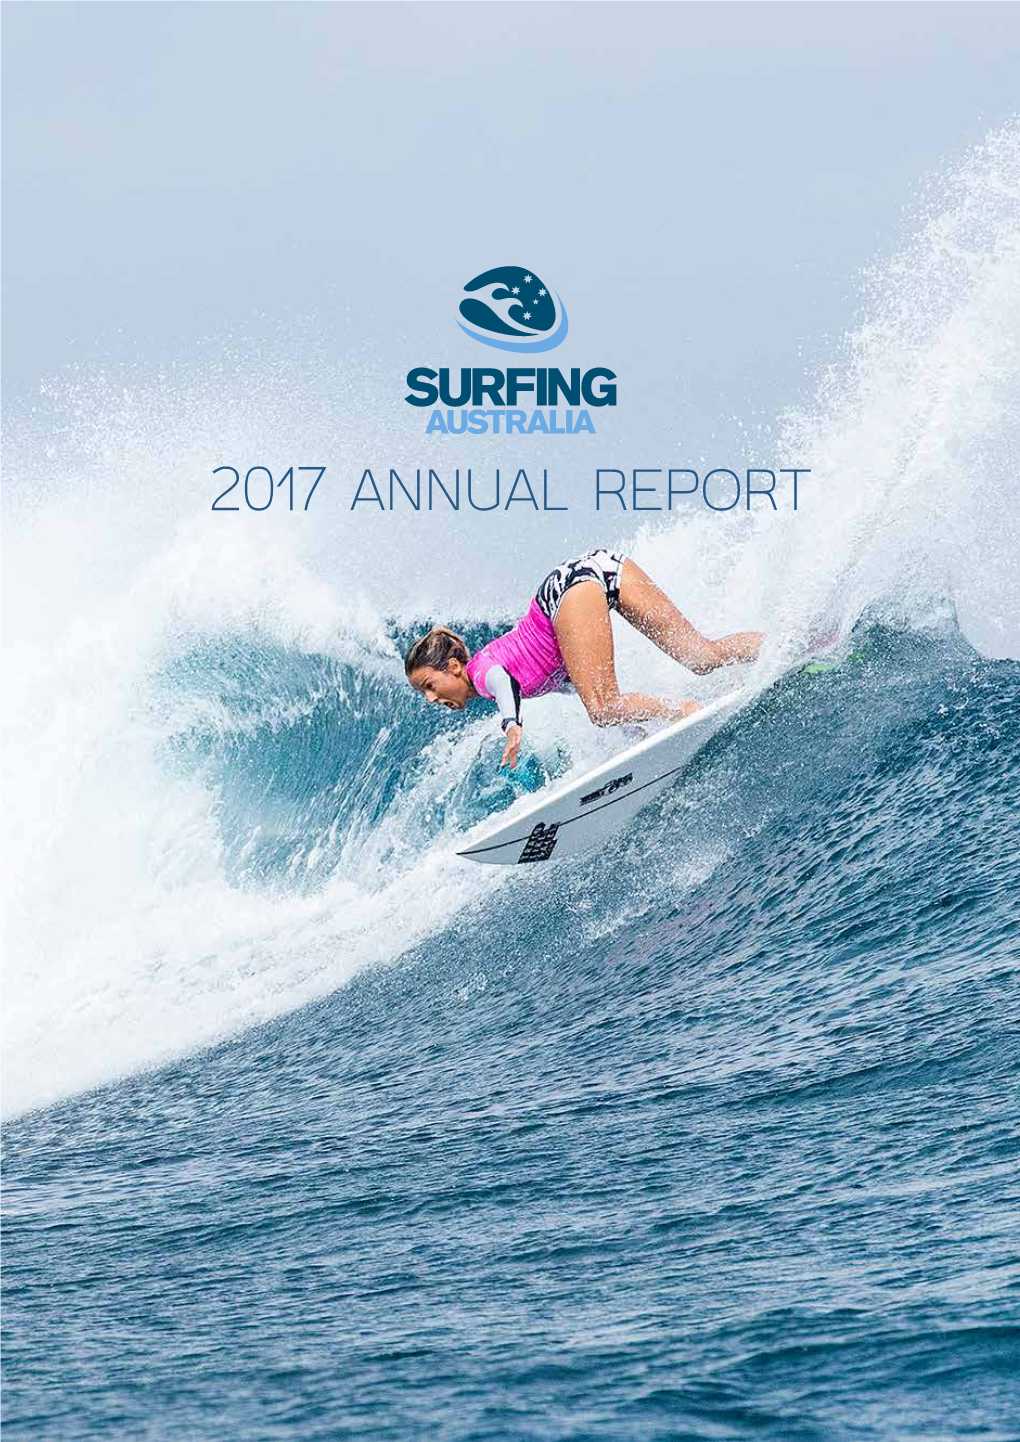 2017 Annual Report About Surfing Australia